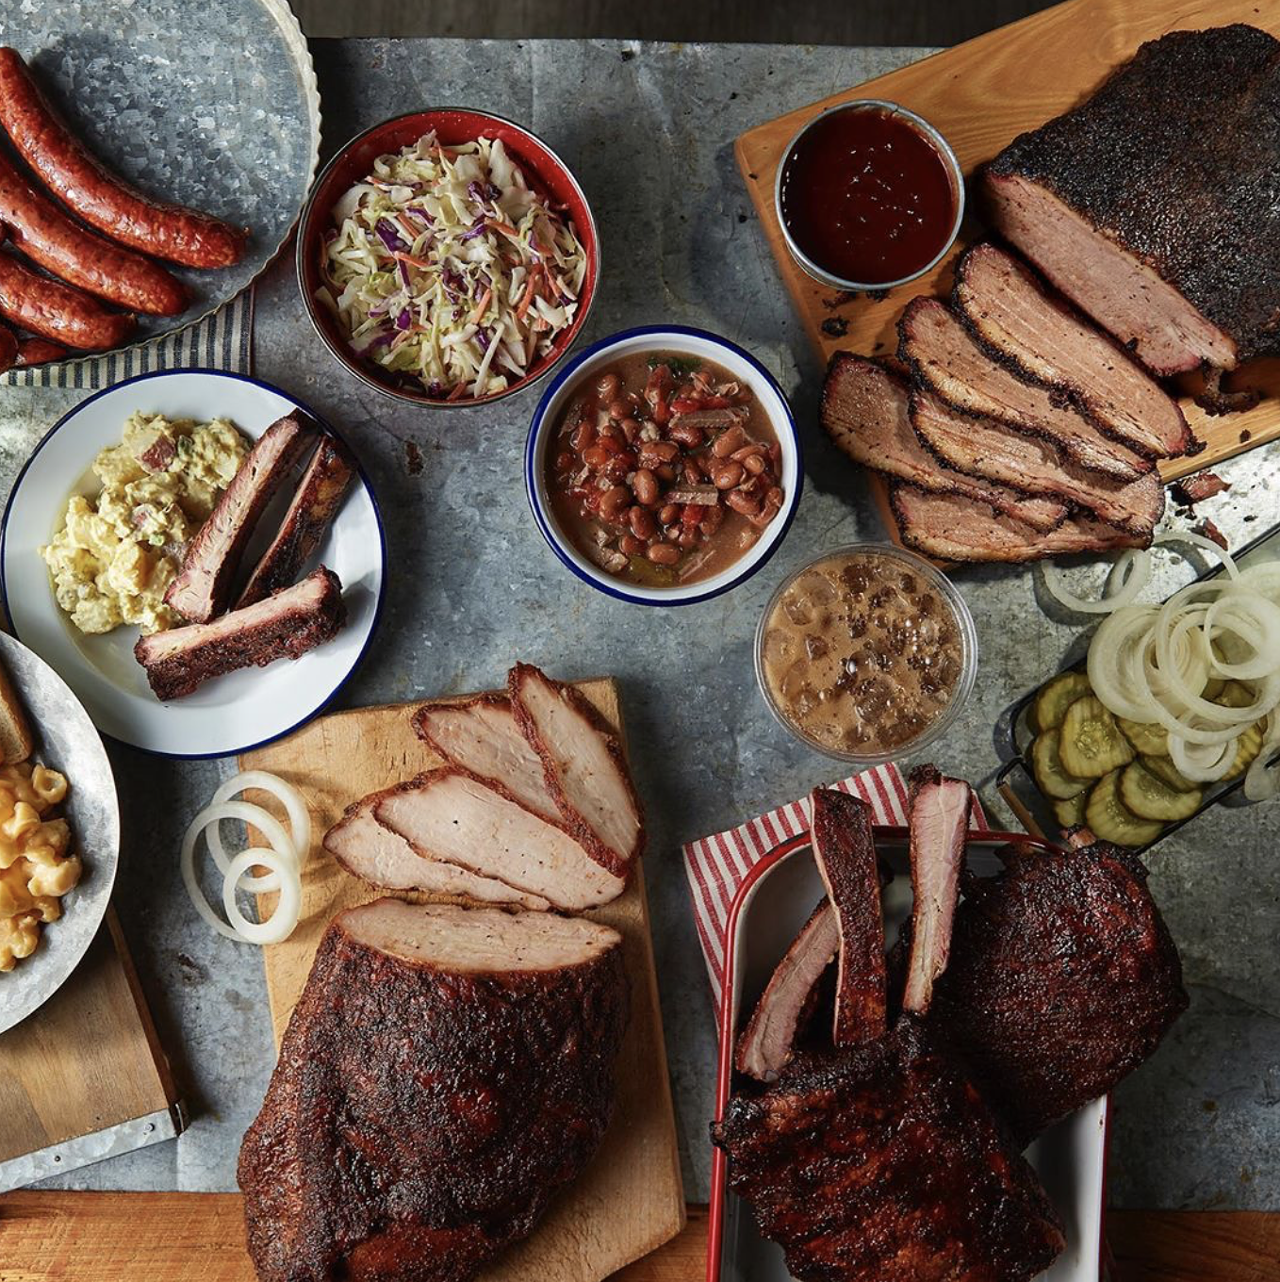 True Texas BBQ
Multiple Locations heb.com
H-E-B’s BBQ concept has a huge array of take-home holiday meals, available hot and ready-to-eat or cold and ready-to-heat. Choose from turkey, brisket, prime rib roast and all the fixins in meals that can feed four to twelve people. 
Photo via Instagram / truetexasbbq